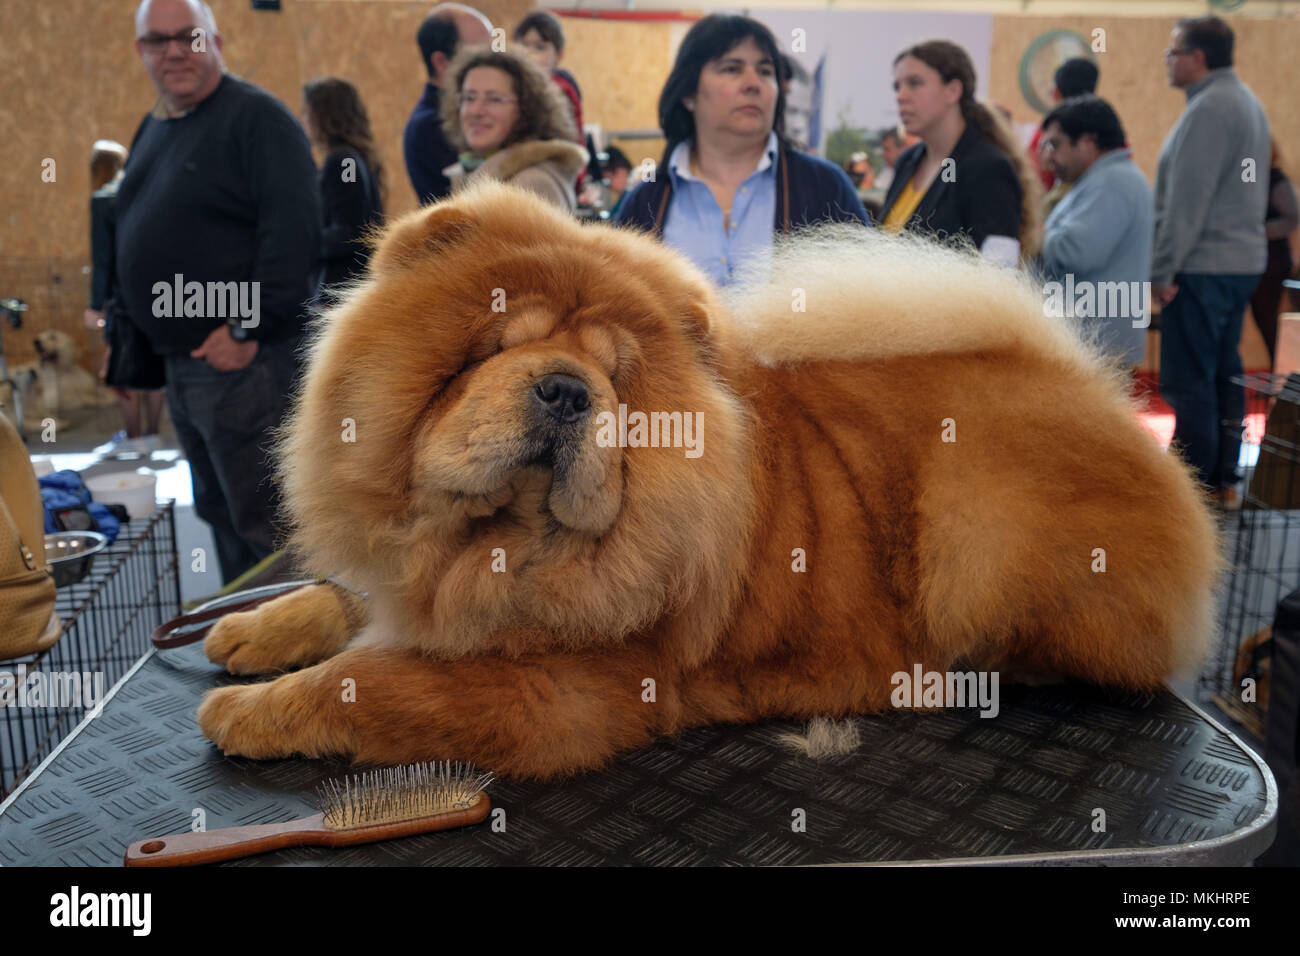 Chow Chow dog lying down during a dog show Stock Photo